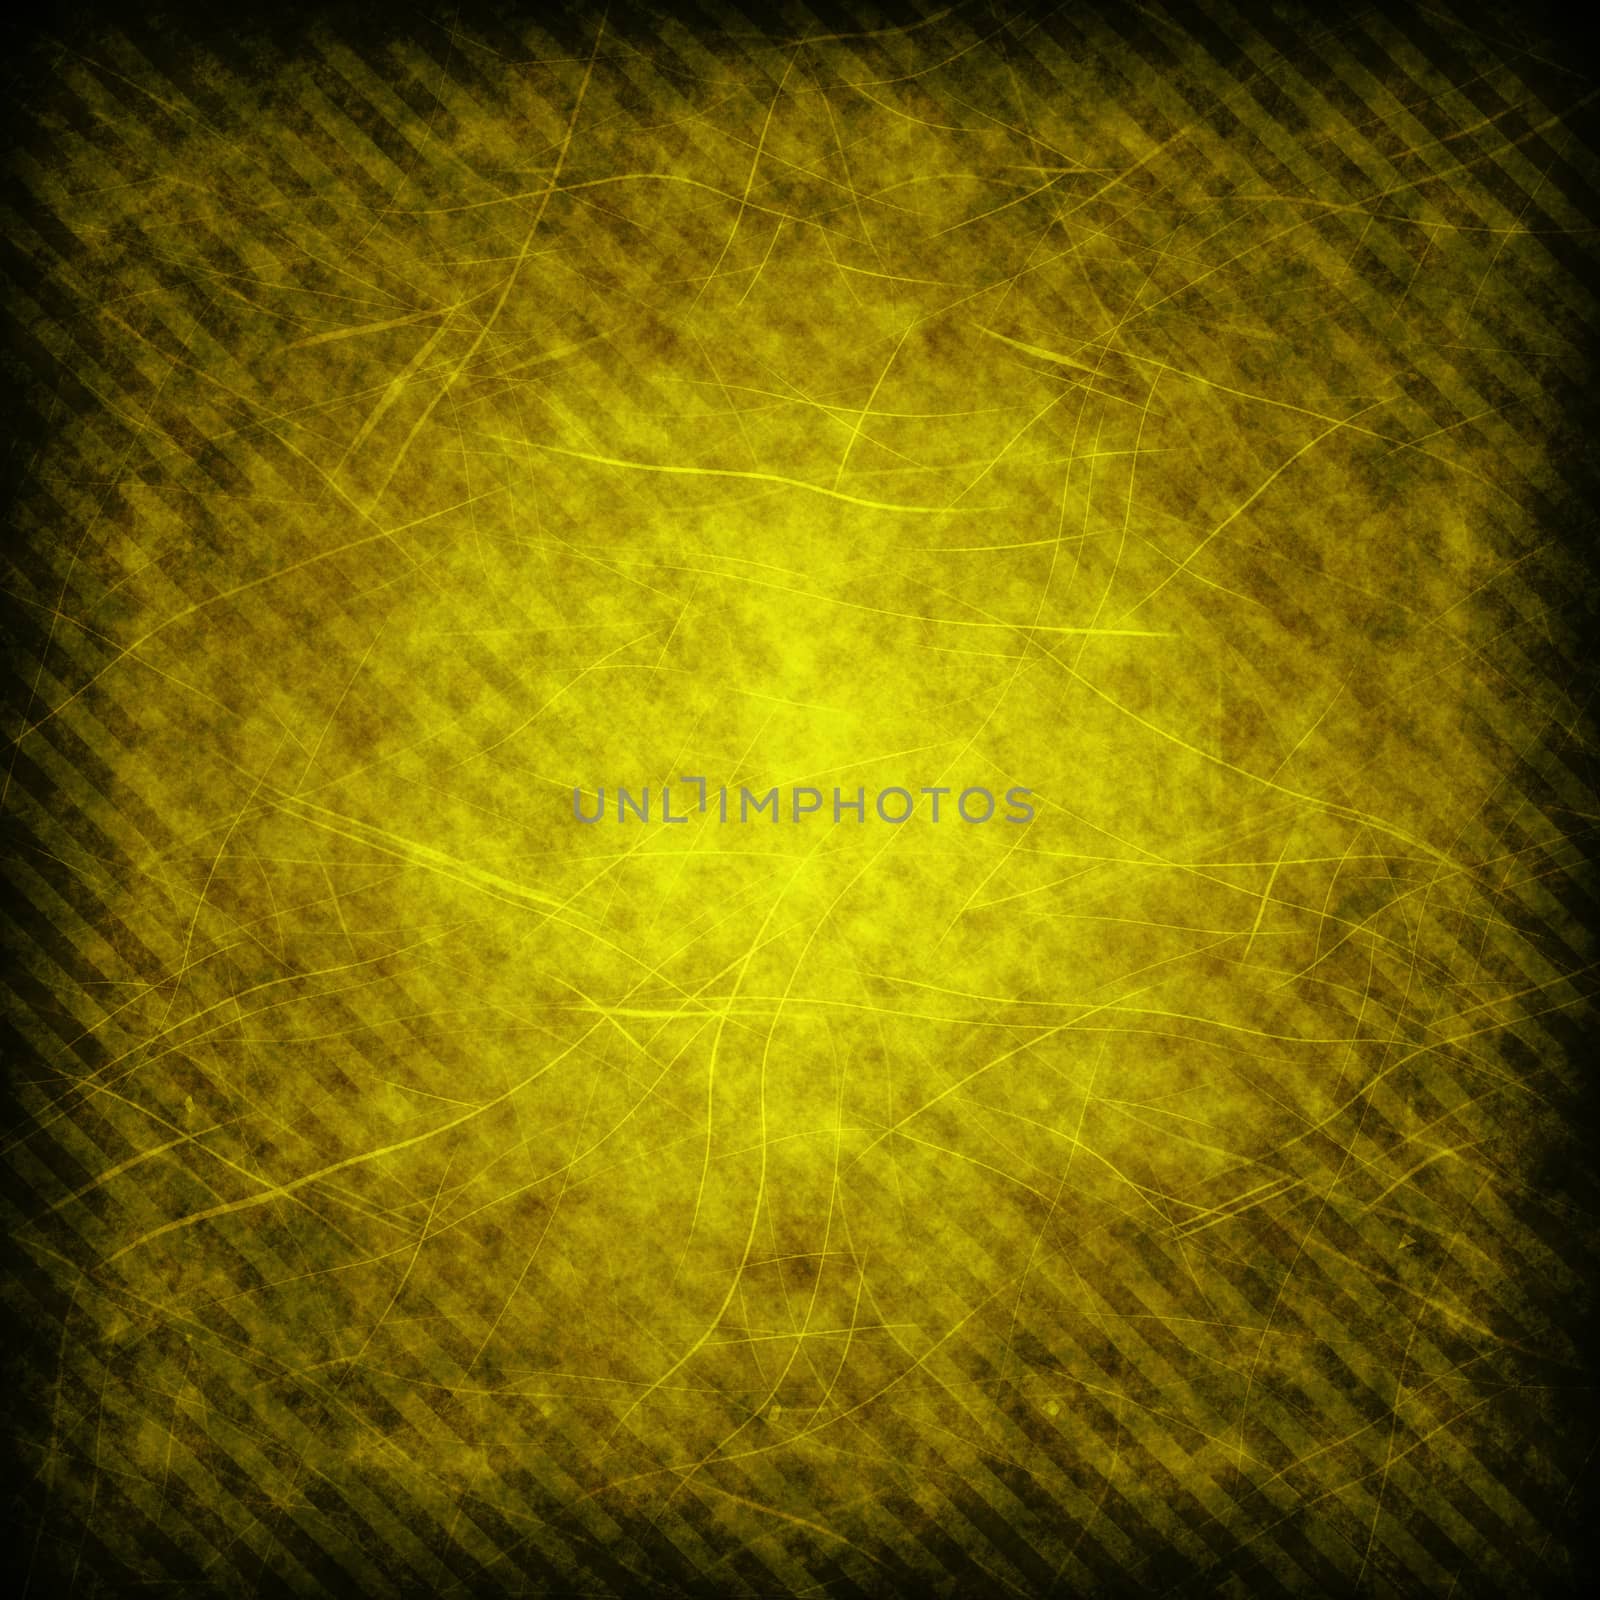 Yellow grunge striped background or texture